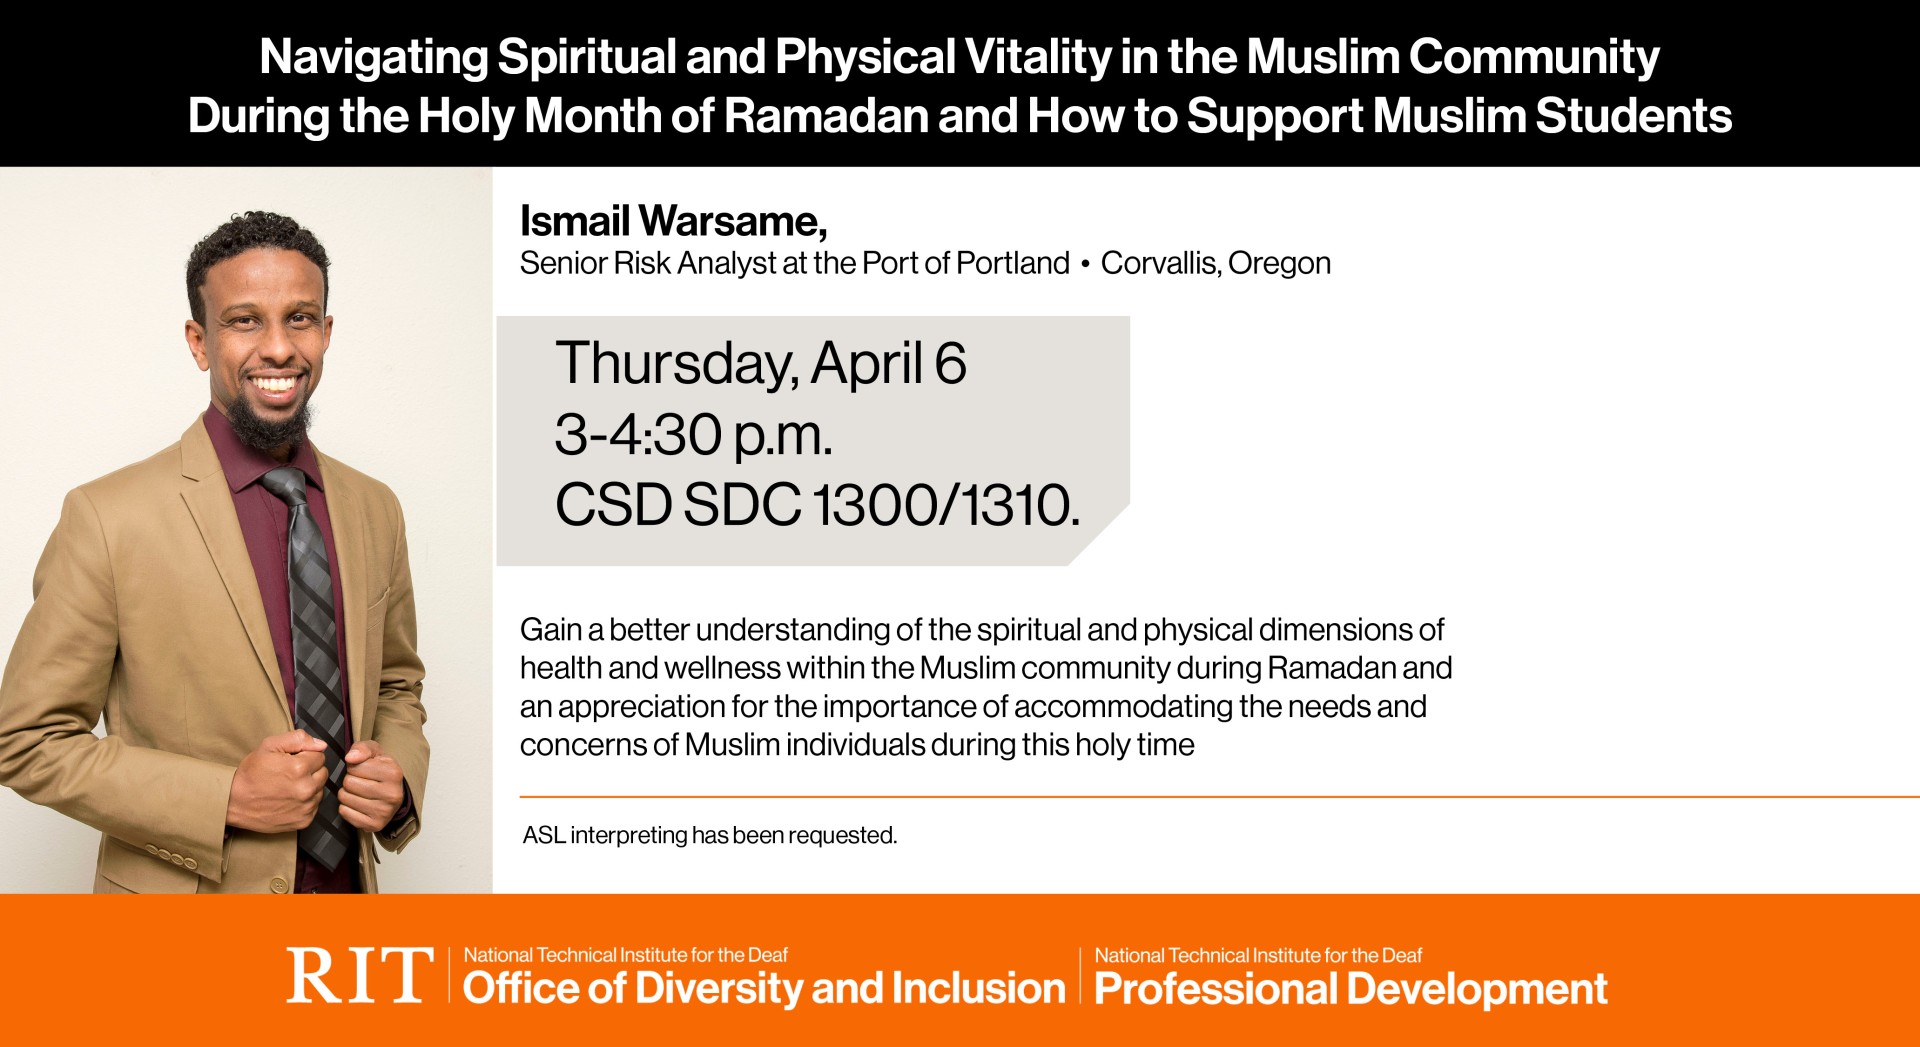 Flyer for April 6 presentation - Navigating Spiritual and Physical Vitality in the Muslim Community